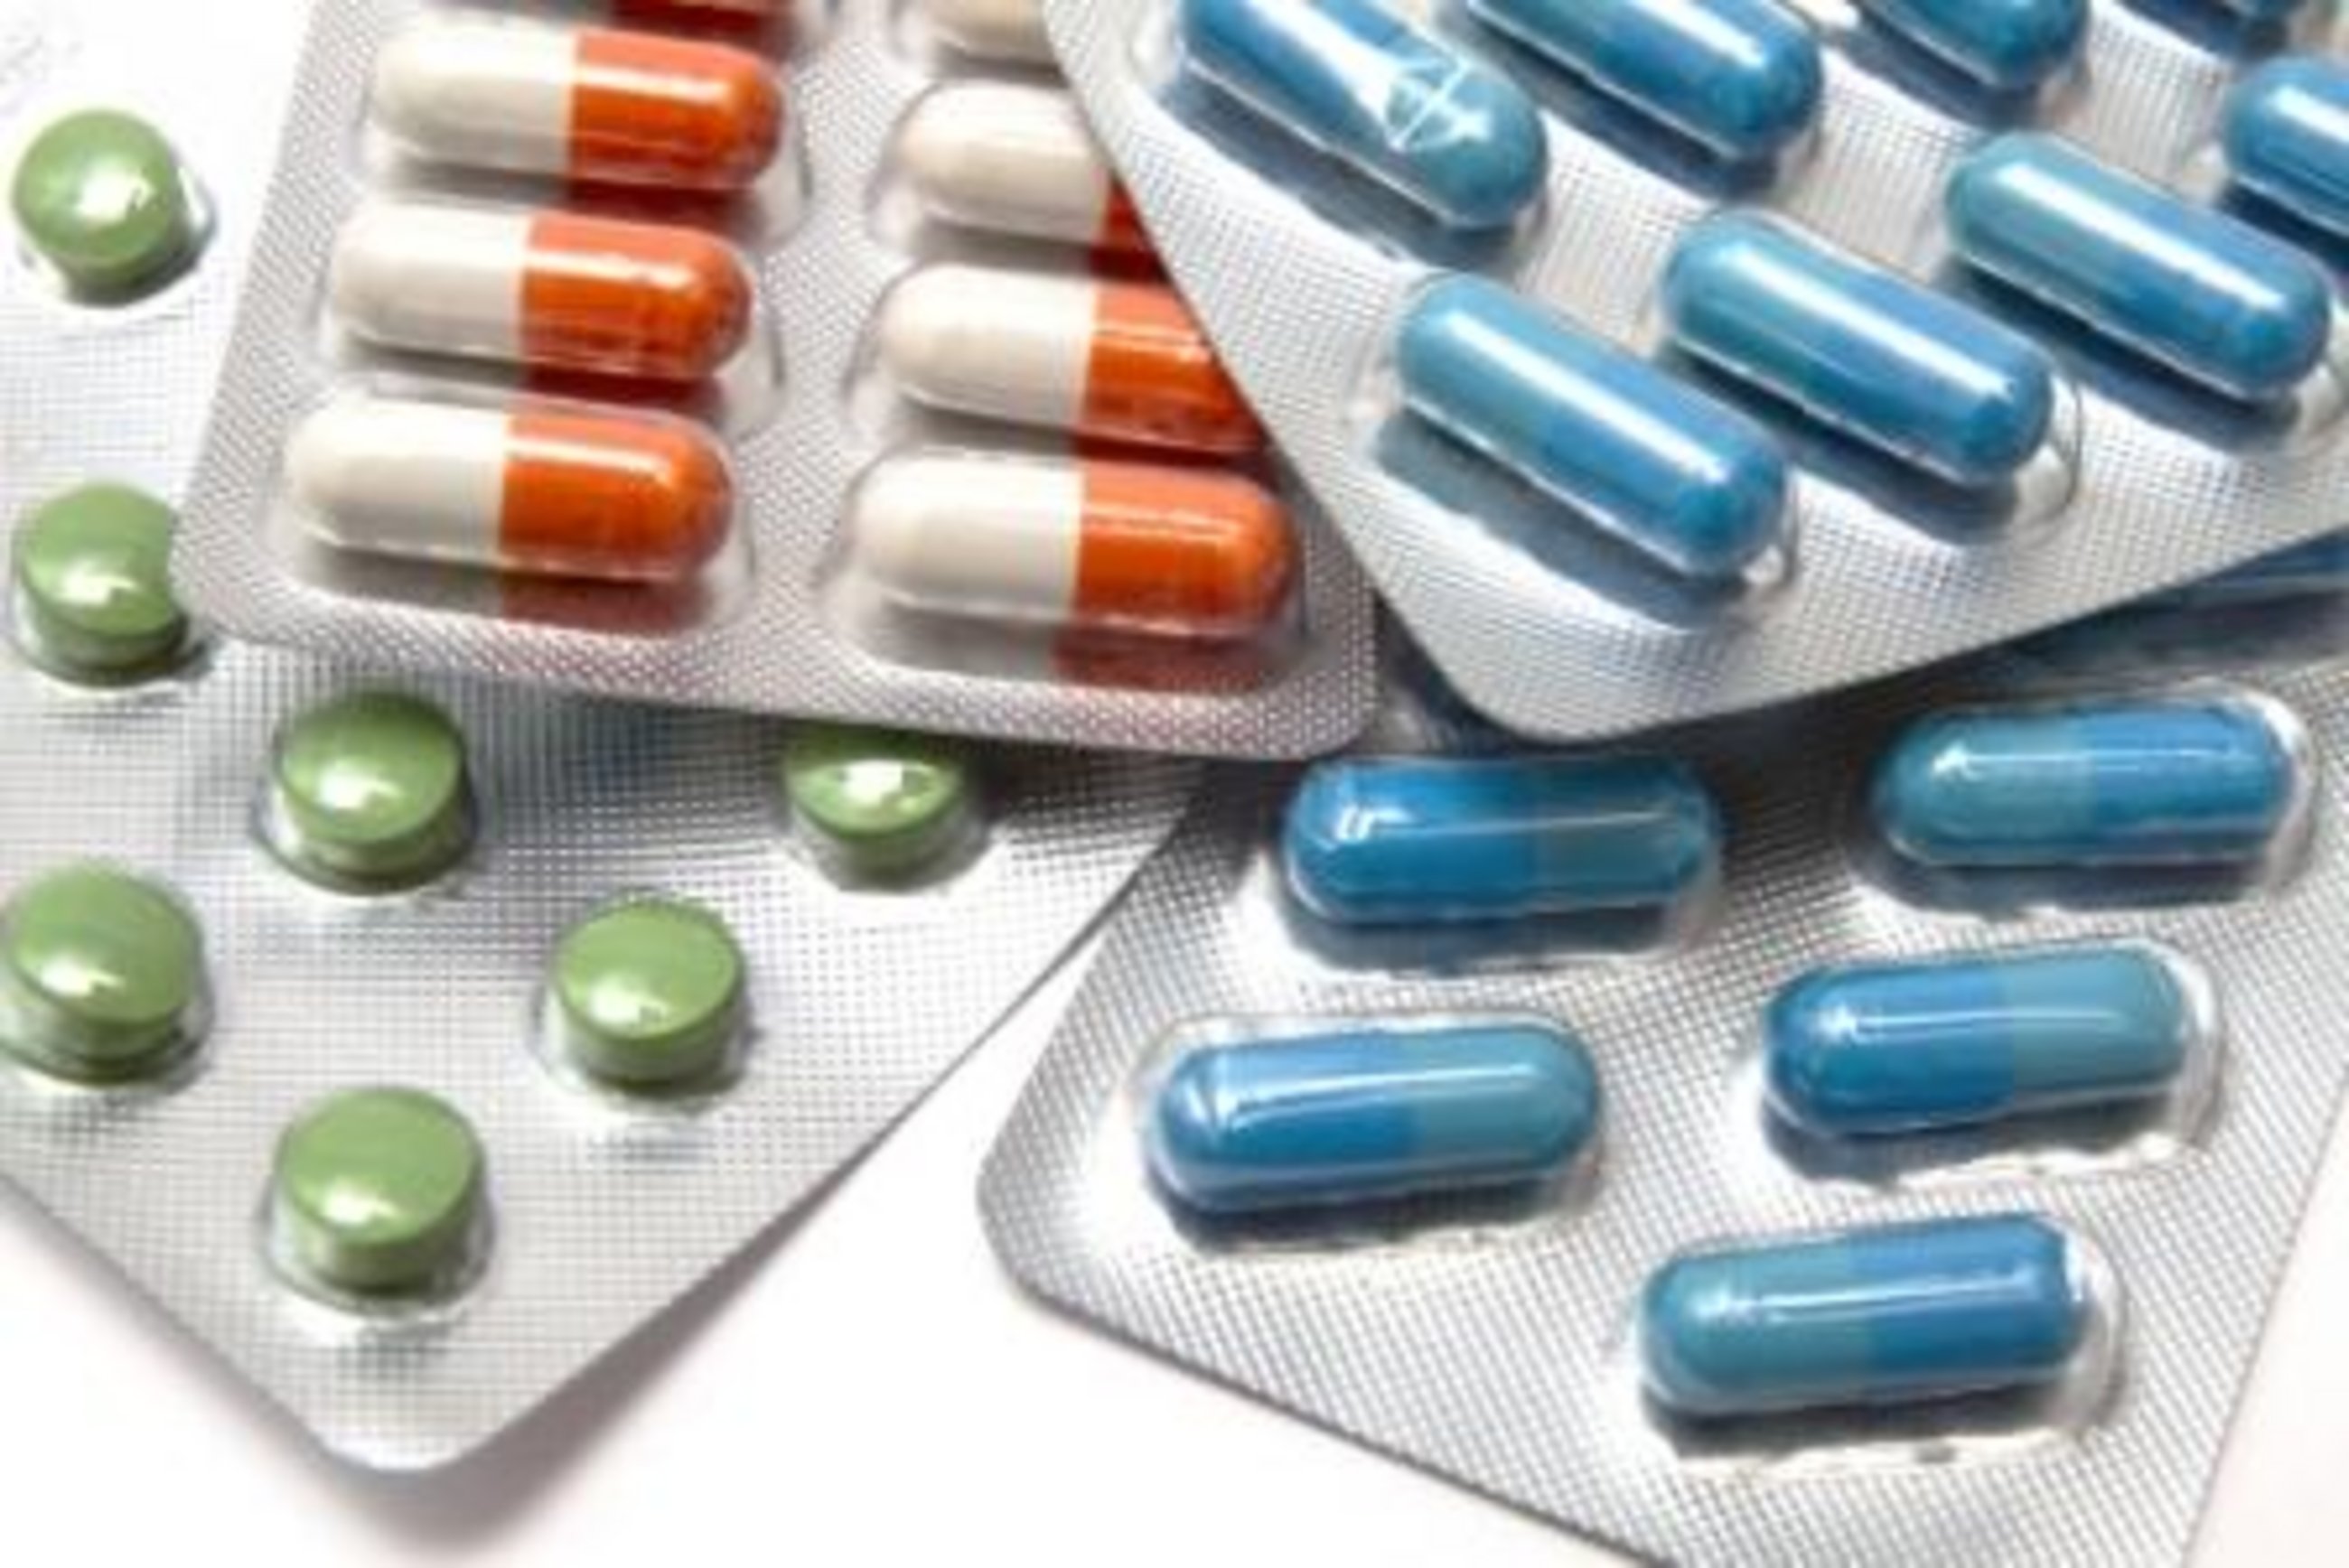 Anti-counterfeiting of medicinal products (Directive)